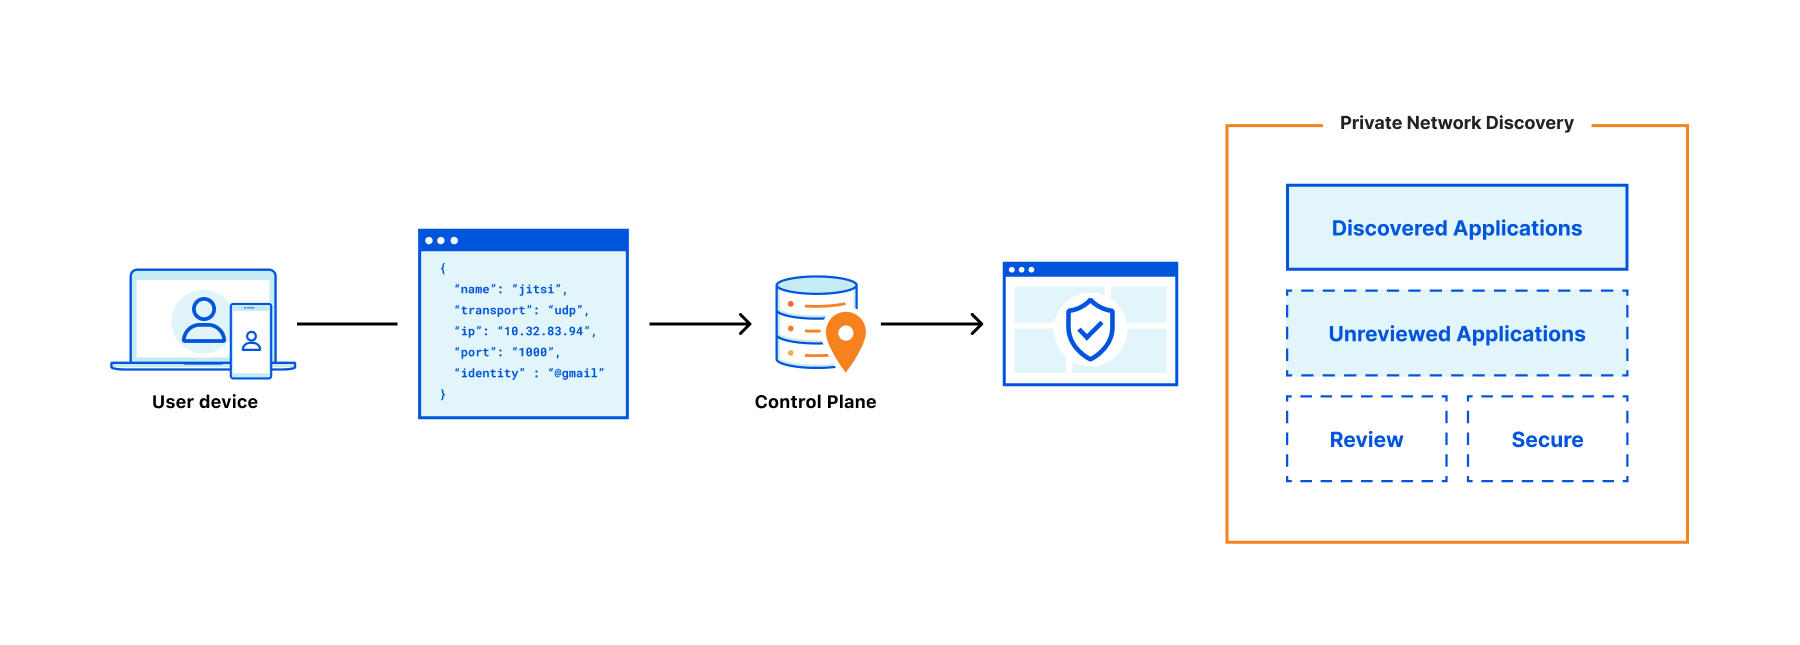 Introducing Private Network Discovery